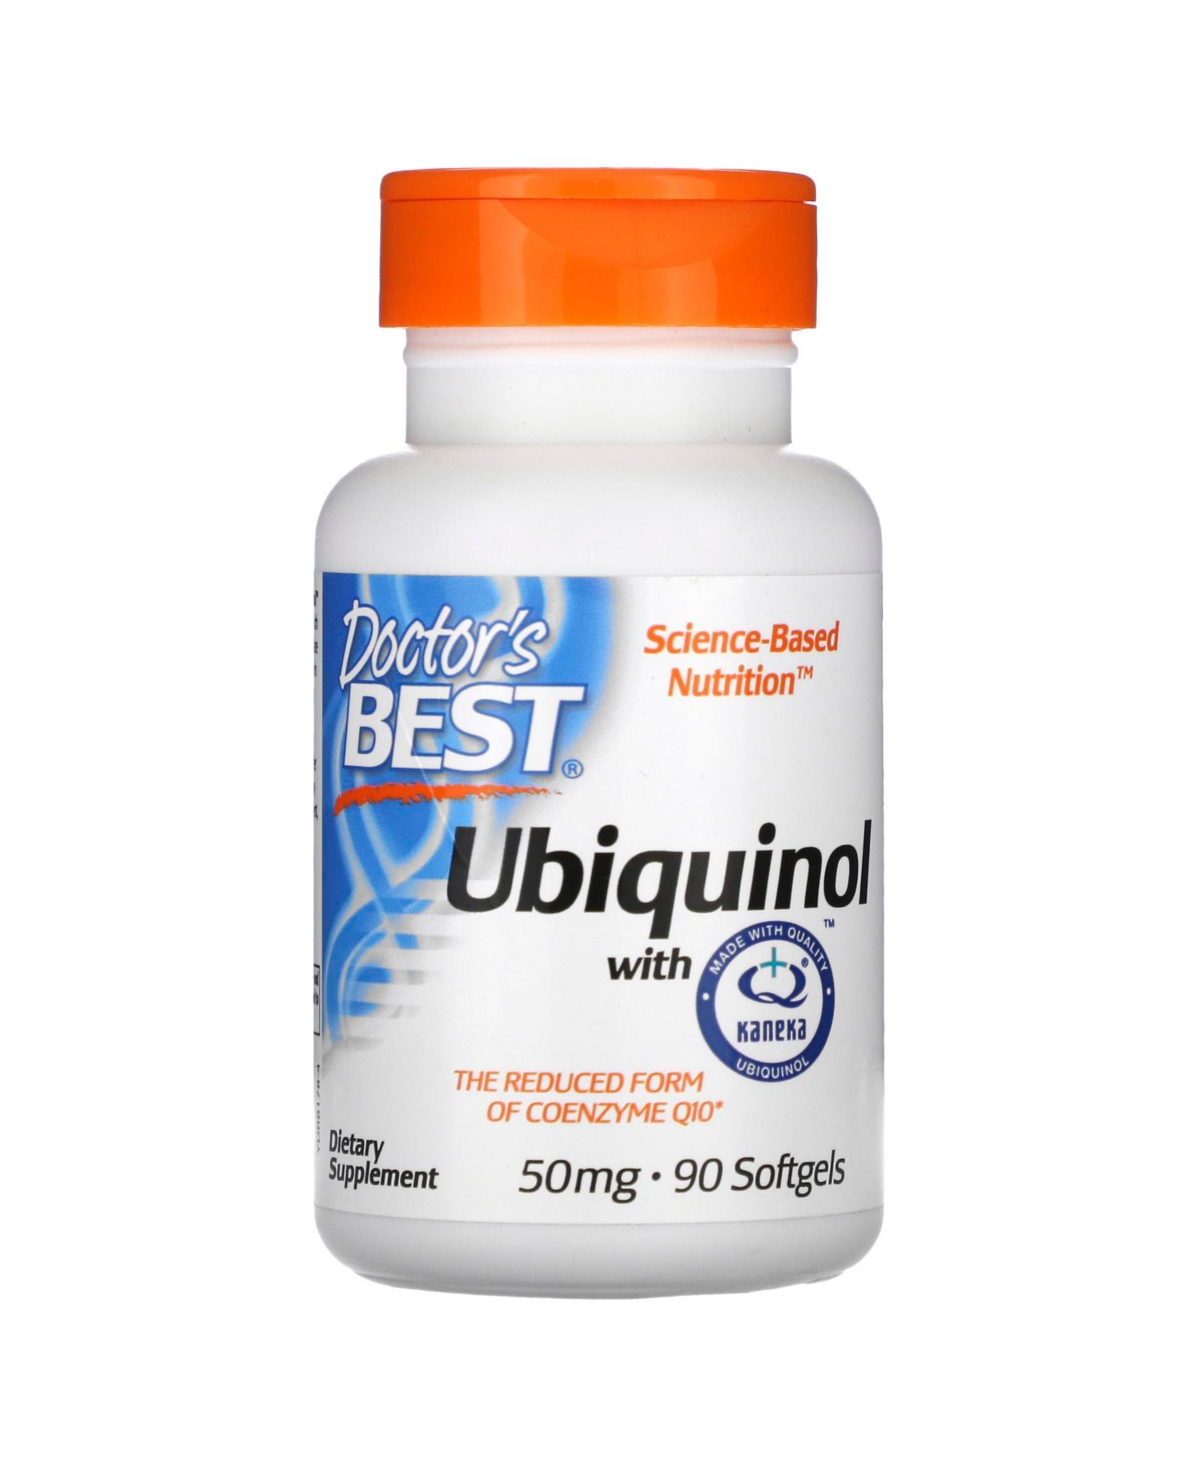 Ubiquinol with Kaneka 50 mg - 90 Softgels - Assorted Pre-pack (See Table